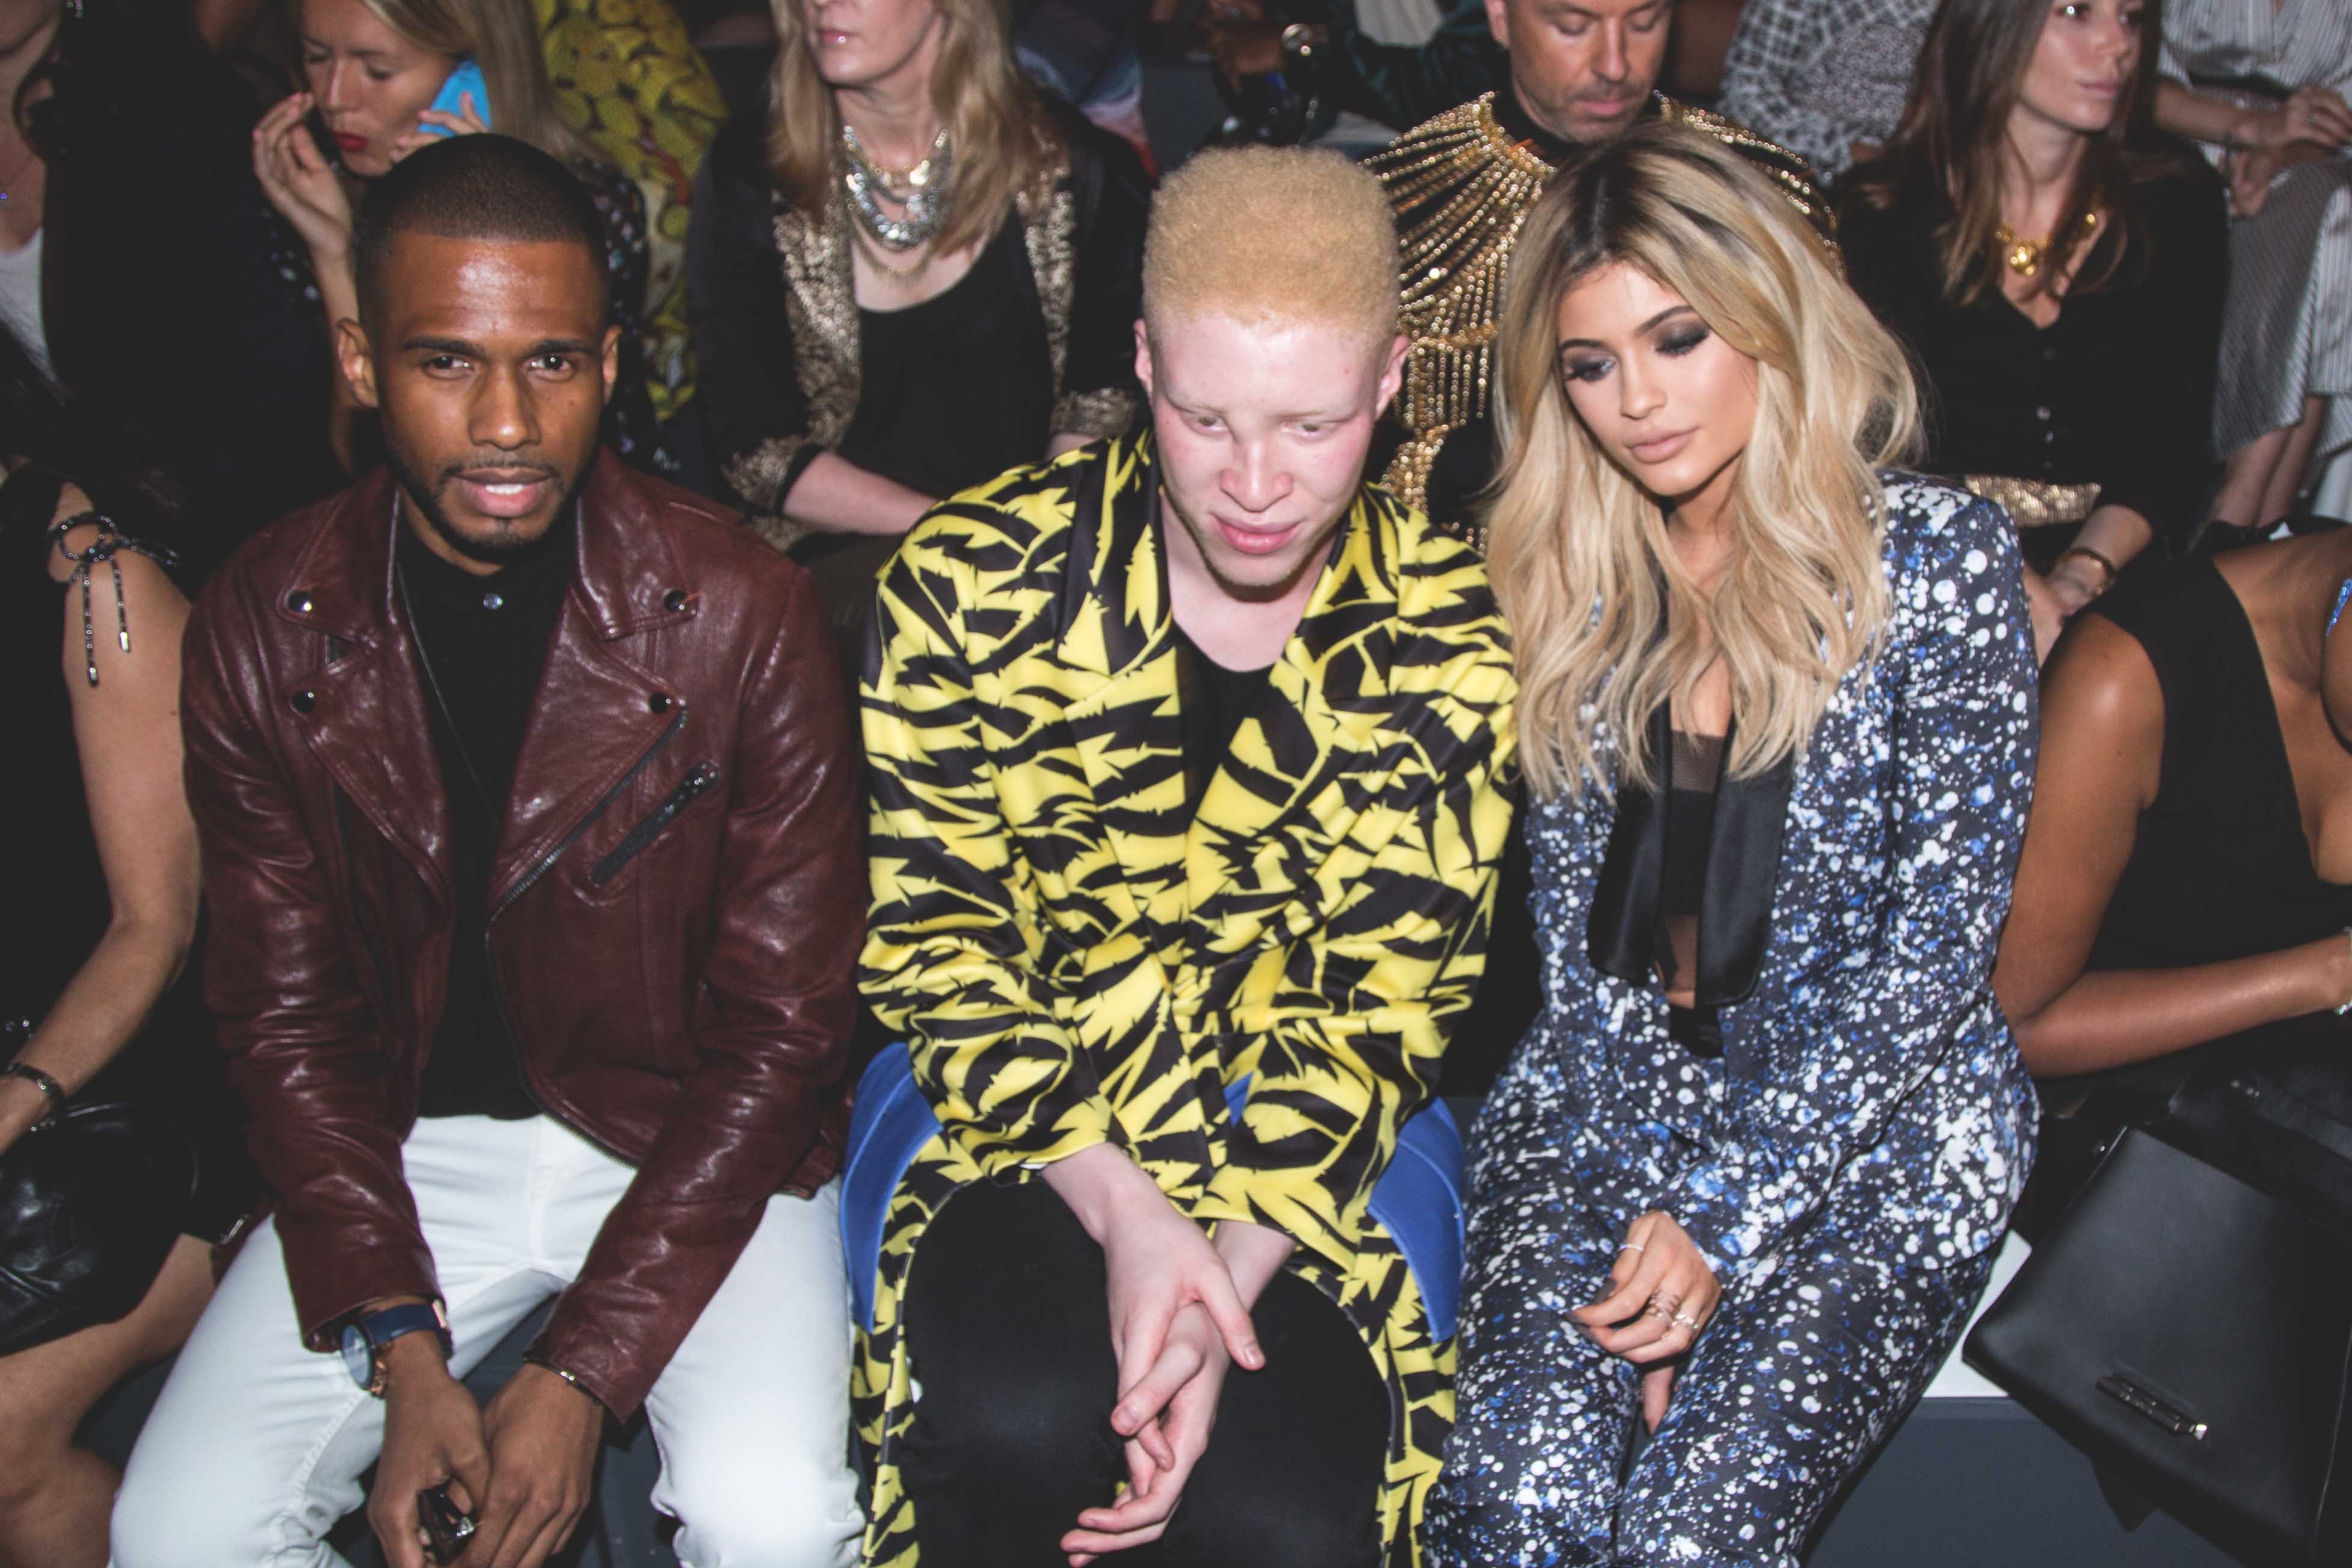 Actor Eric West, model Shaun Ross and, tv personality Kylie Jenner attend Prabal Gurung Spring 2016 during New York Fashion Week: The Shows at The Arc, Skylight at Moynihan Station on September 13, 2015 in New York City.